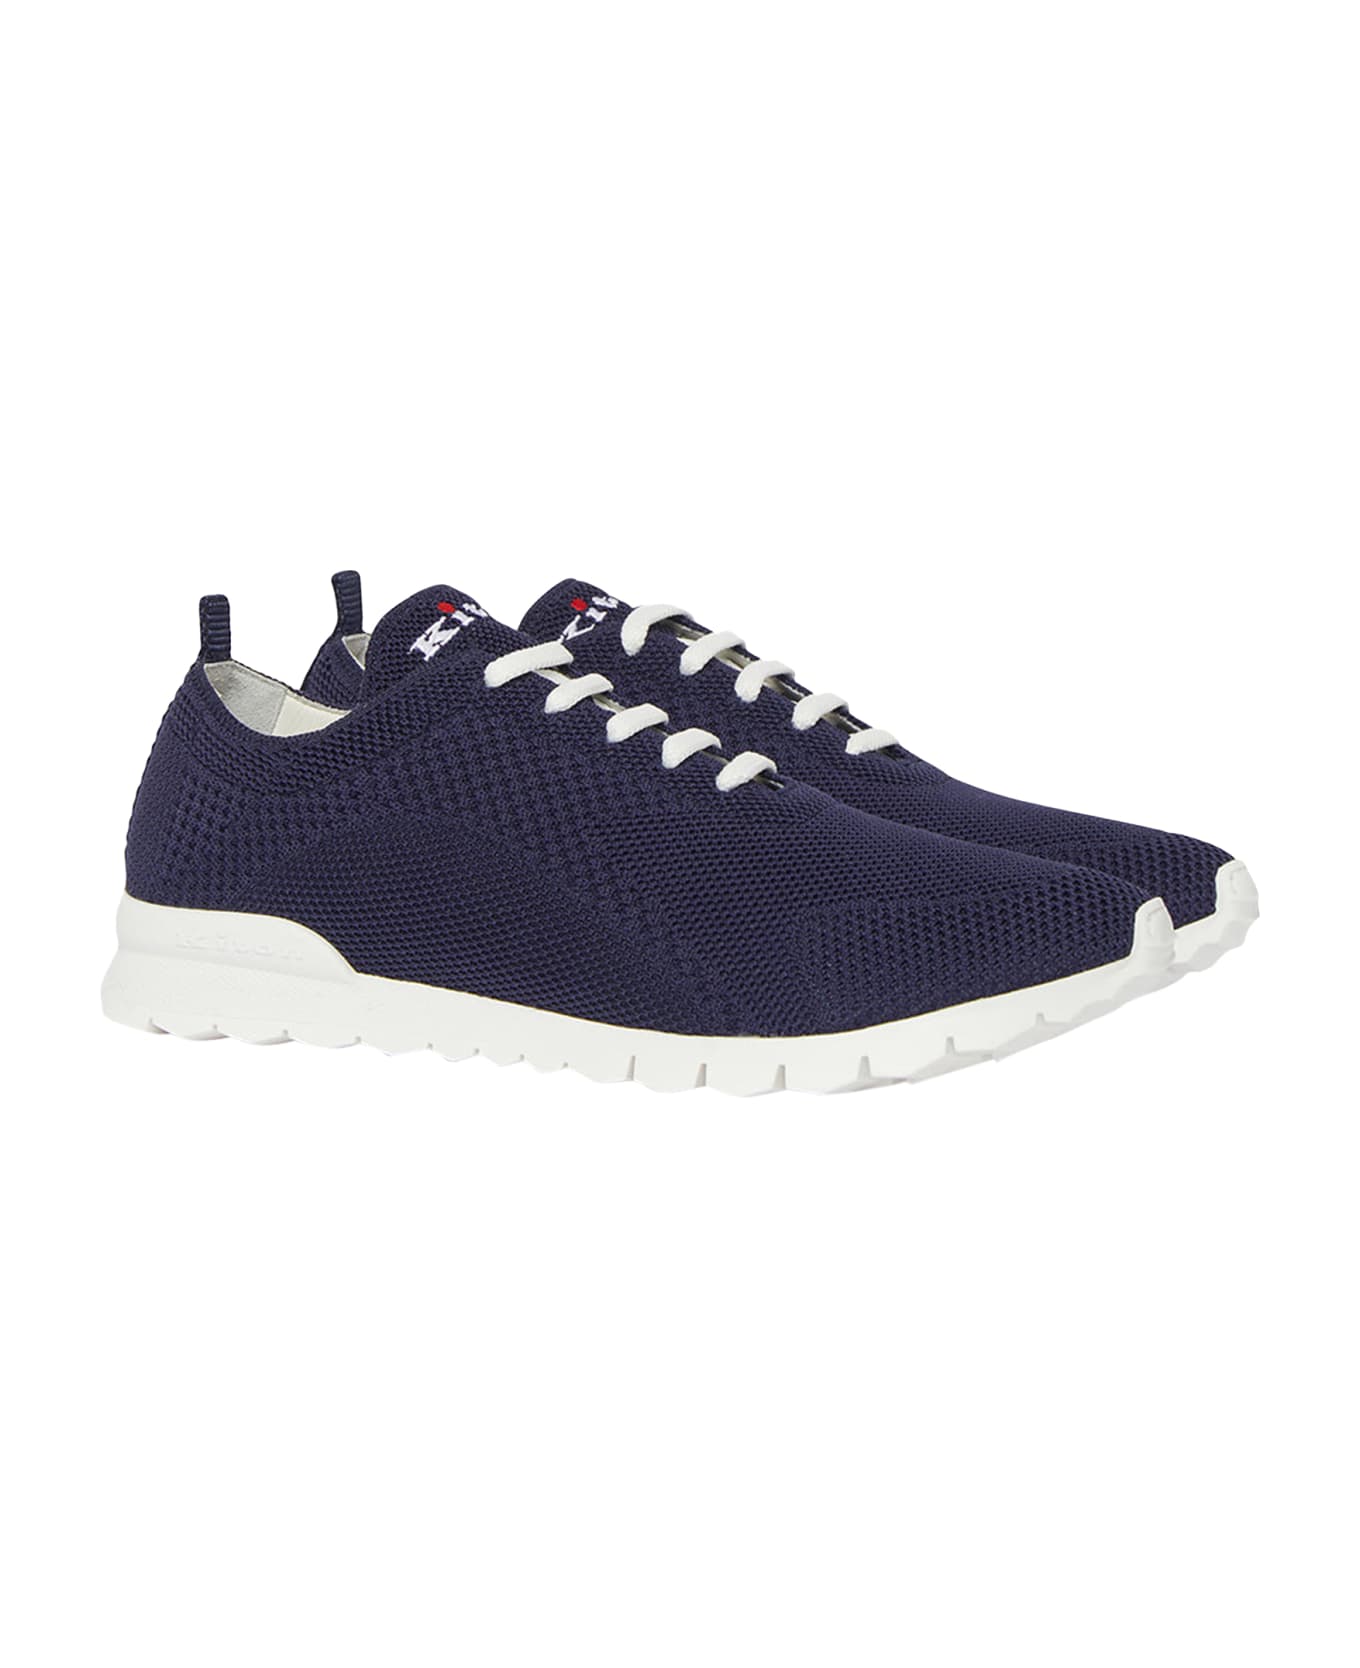 Kiton Fits - Sneakers Shoes Cotton - NAVY BLUE